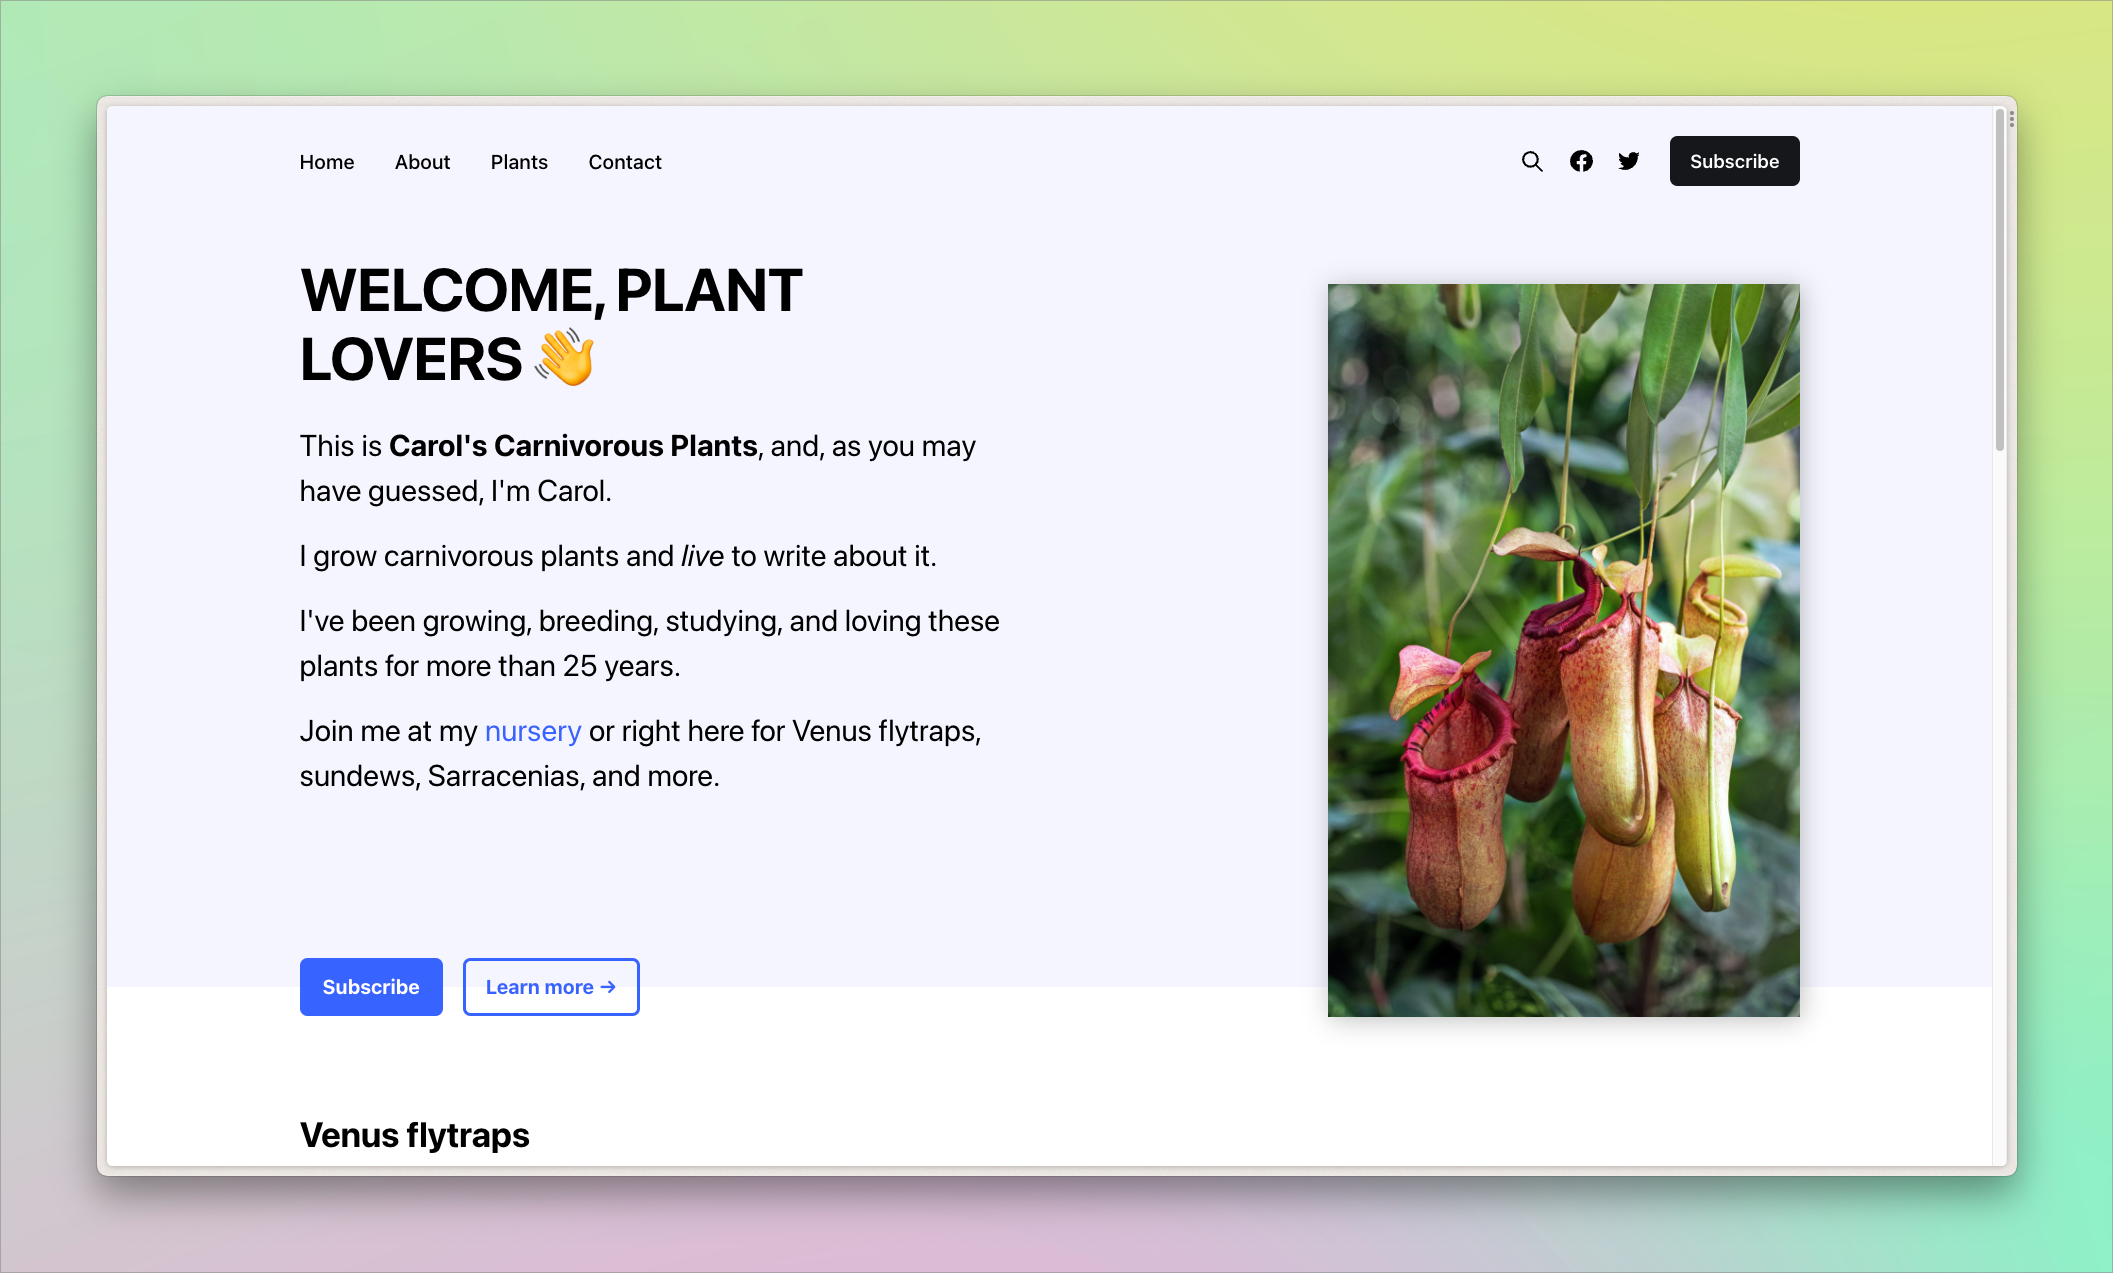 Website for Carol's Carnivorous Plants featuring images of carnivorous and copy about Carol